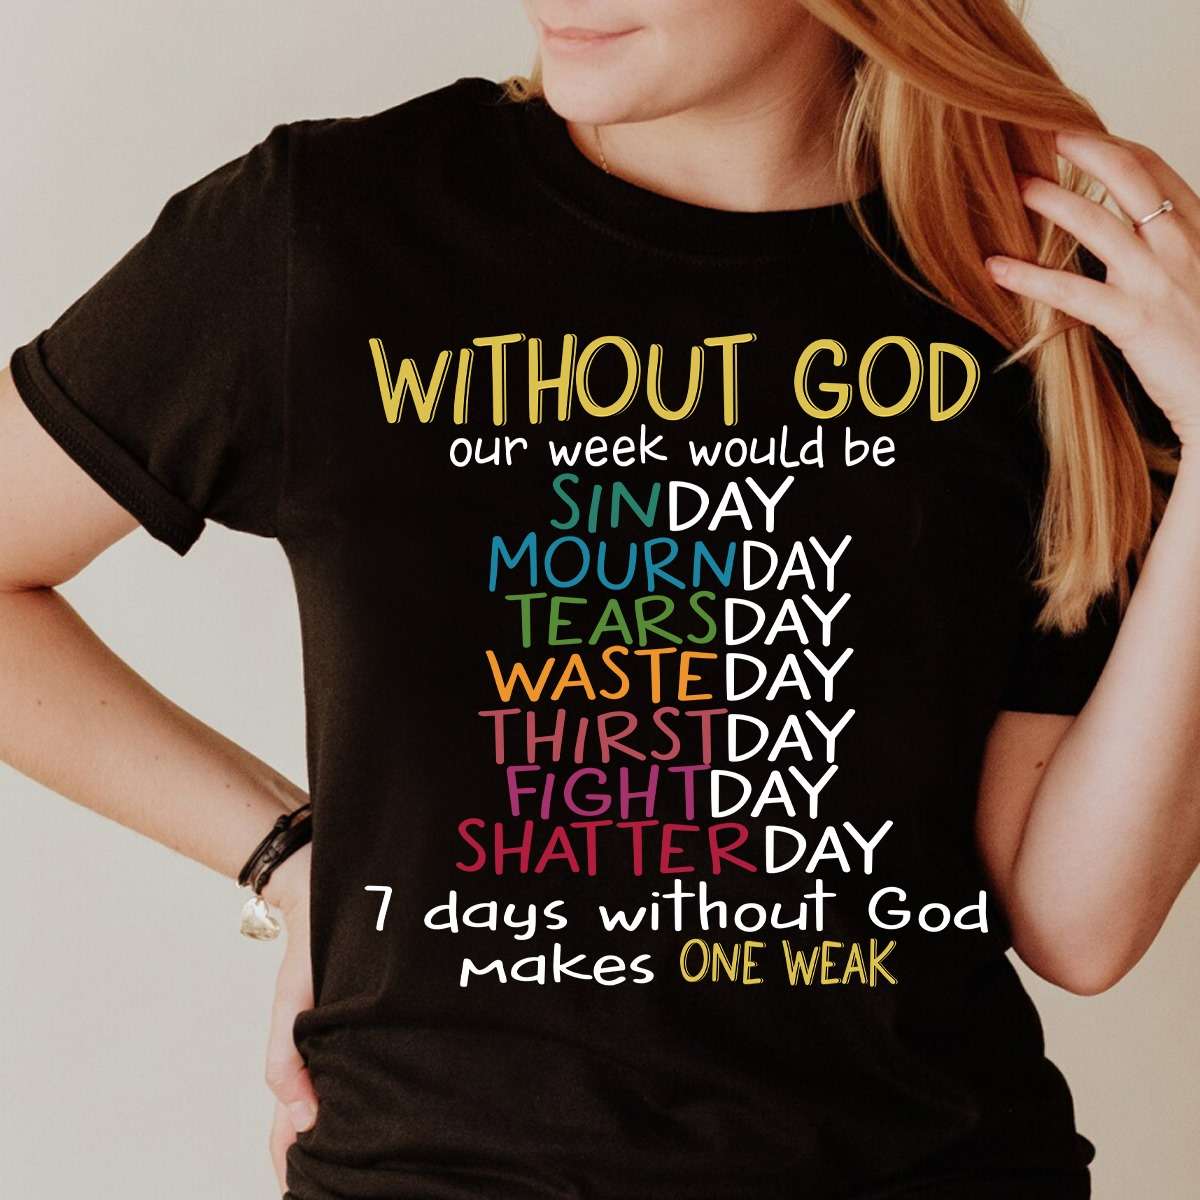 Without god our week would be sinday mournday tearsday wasteday thirstday fightday shatterday